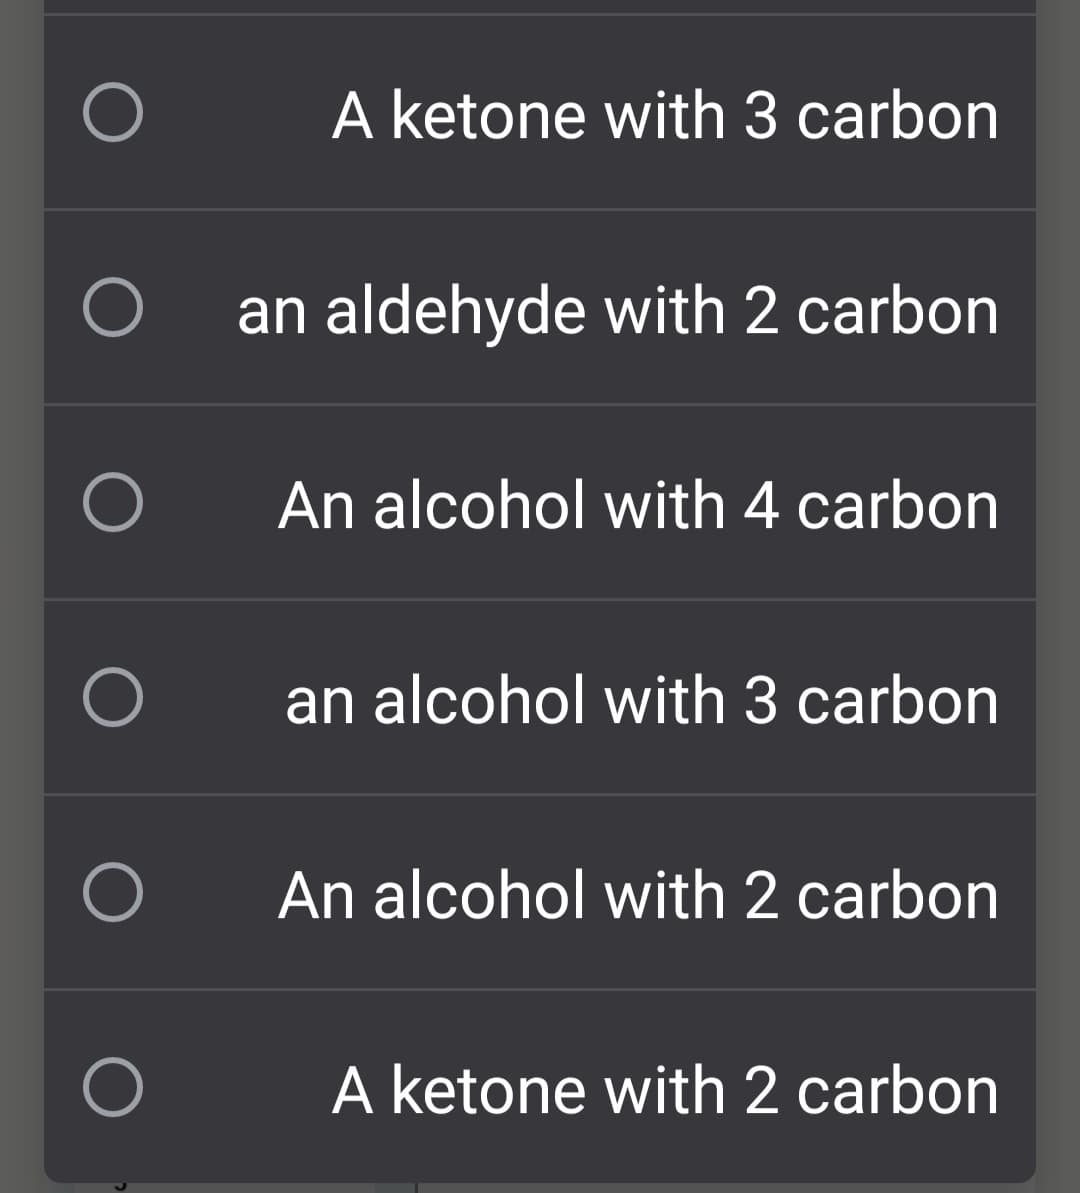 A ketone with 3 carbon
O an aldehyde with 2 carbon
An alcohol with 4 carbon
an alcohol with 3 carbon
An alcohol with 2 carbon
A ketone with 2 carbon
